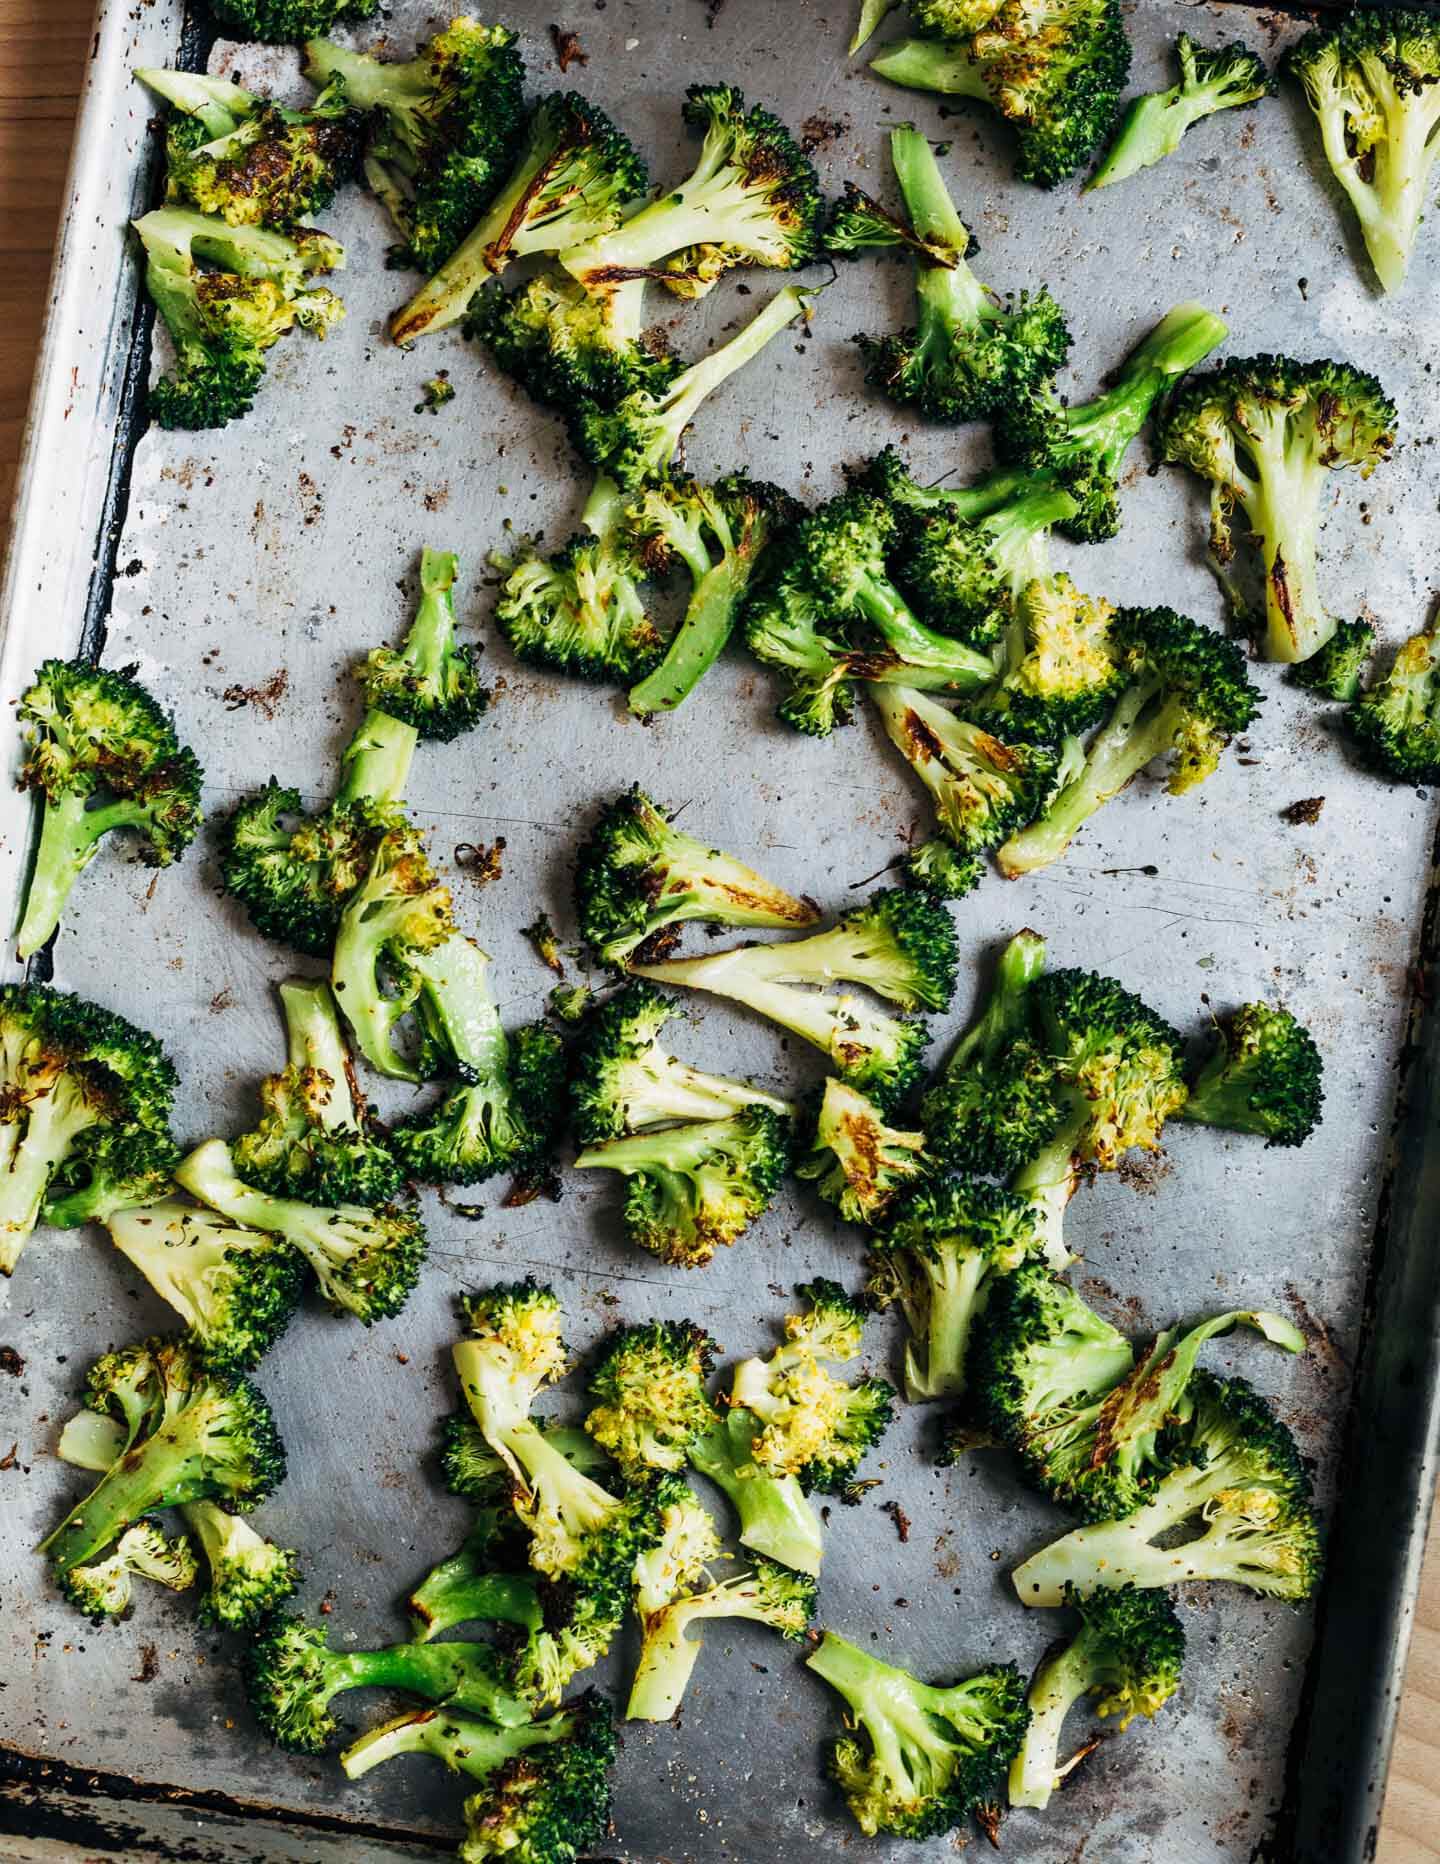 A sheet pan with roasted broccoli